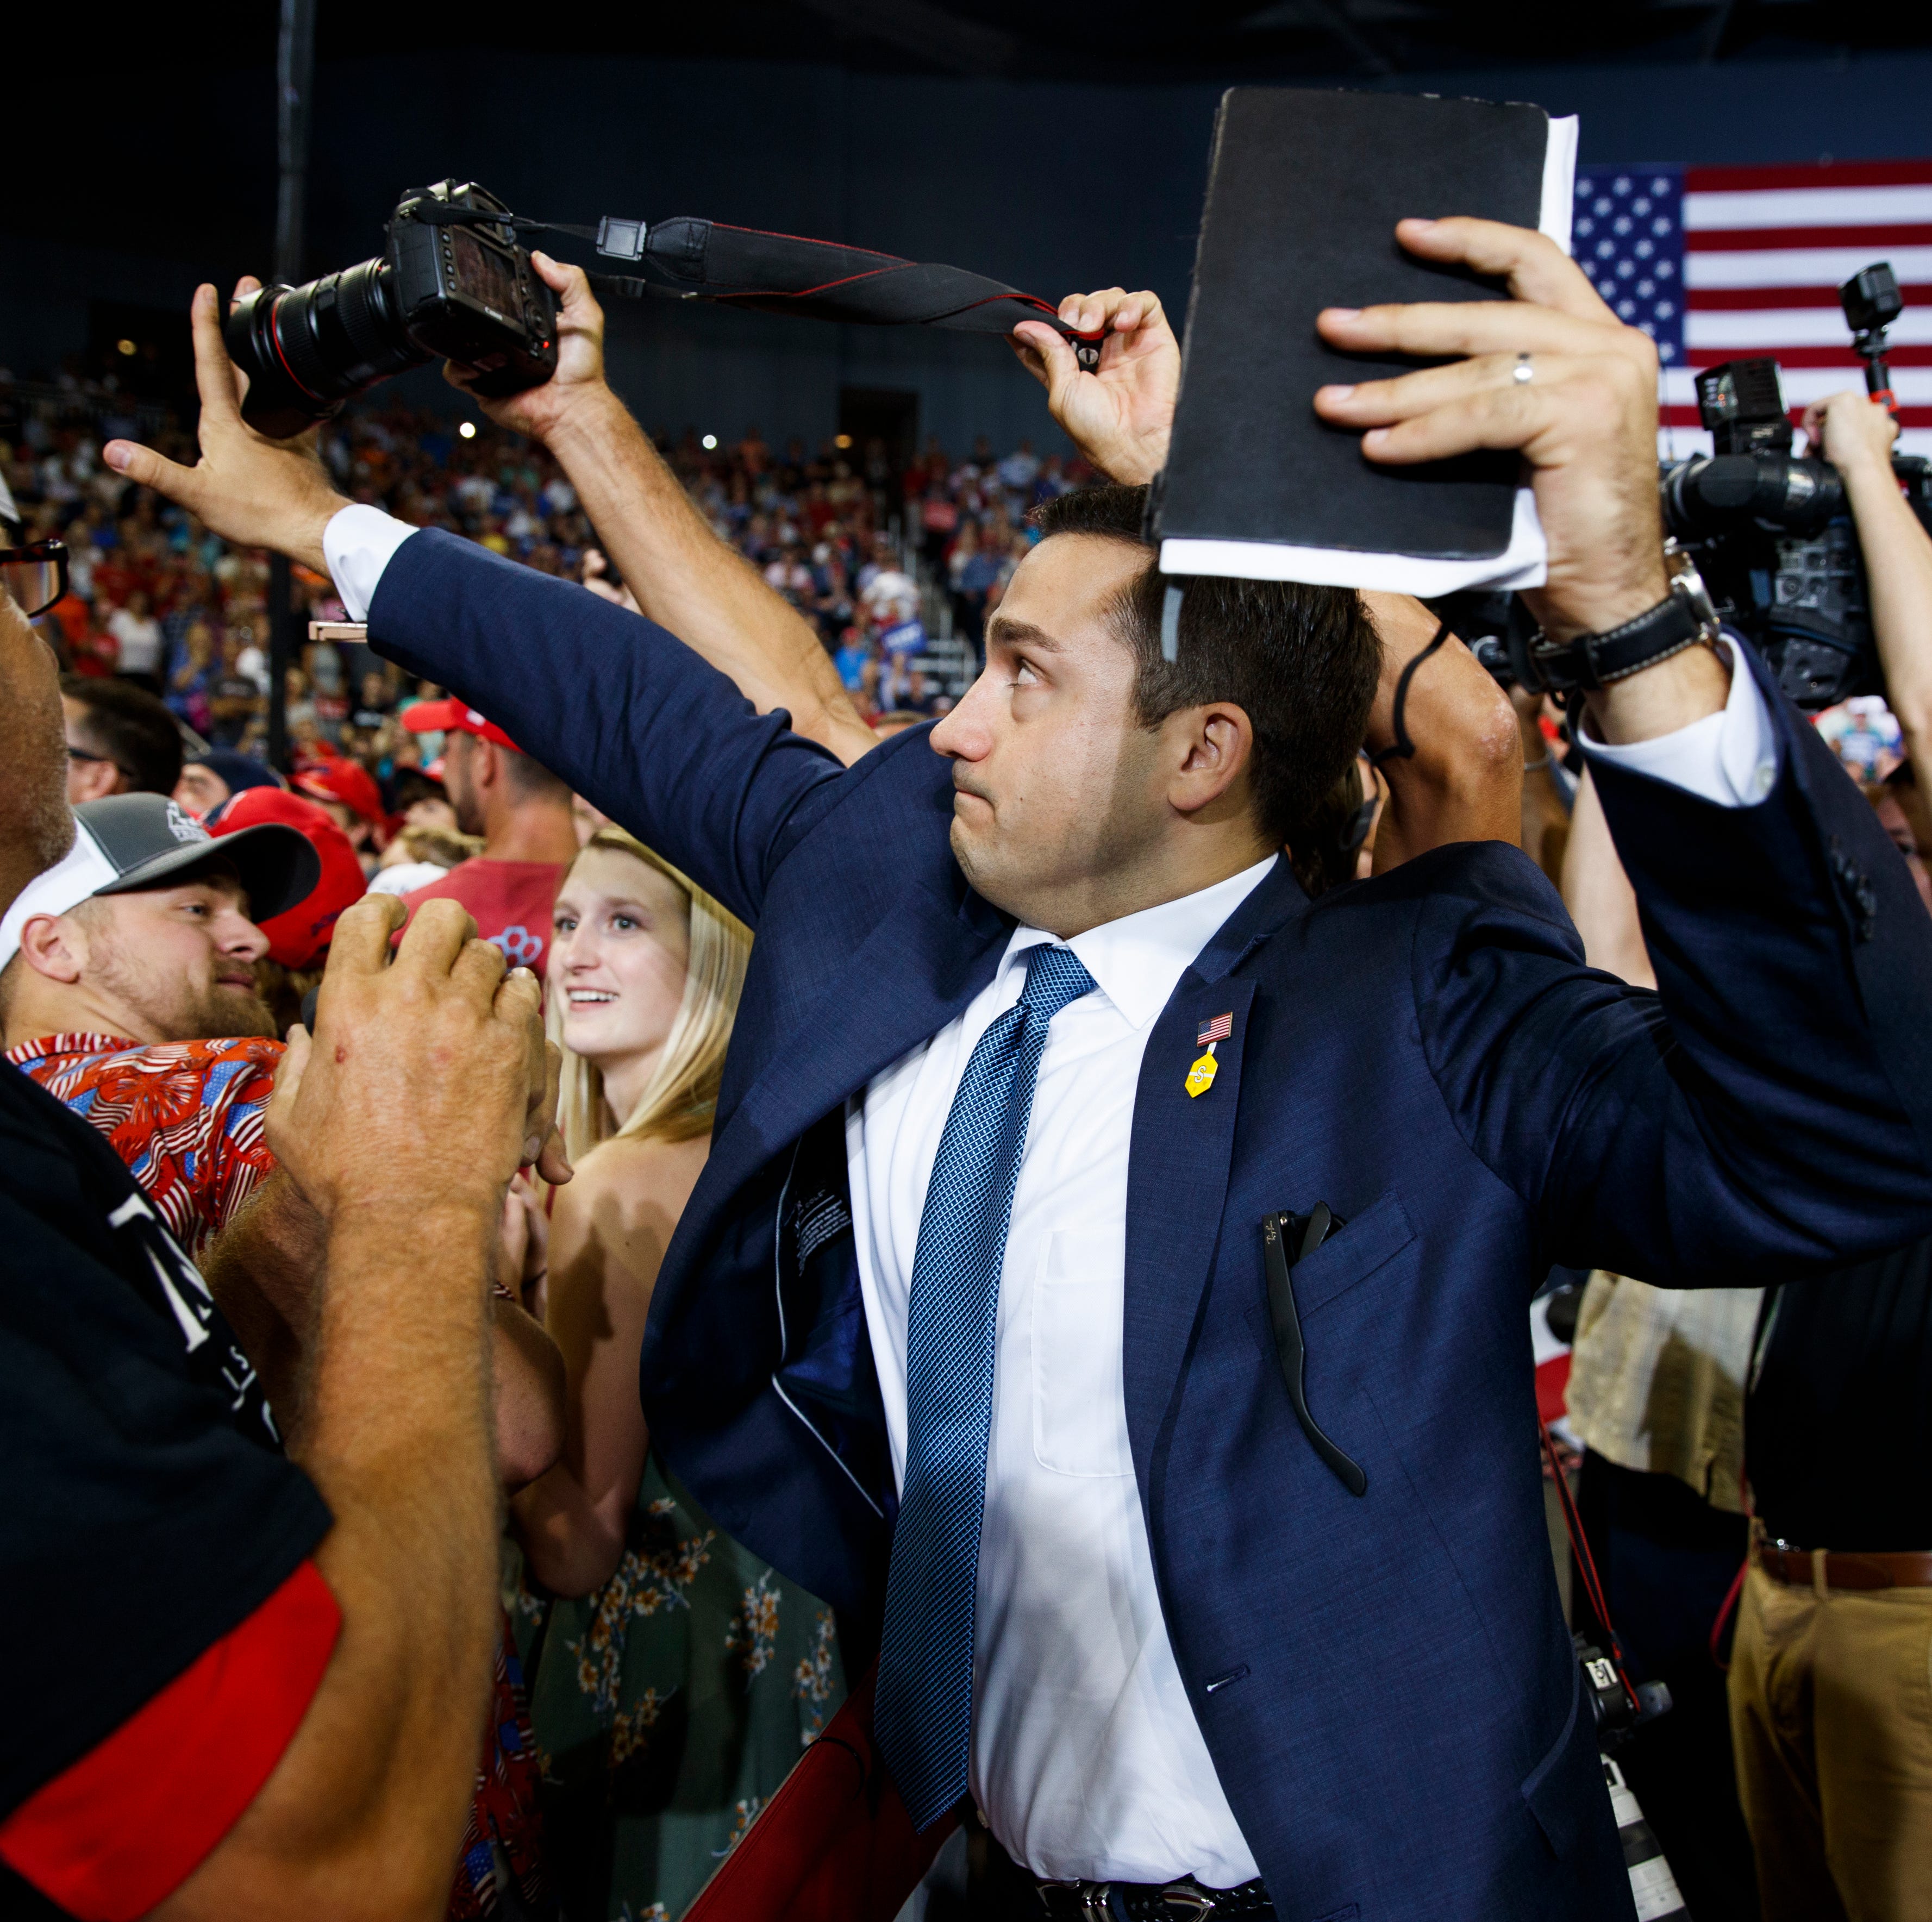 A staff member for President Donald Trump blocks a camera as a photojournalist attempts to take a photo of a protester during a campaign rally at the Ford Center, Thursday, Aug. 30, 2018, in Evansville, Ind.